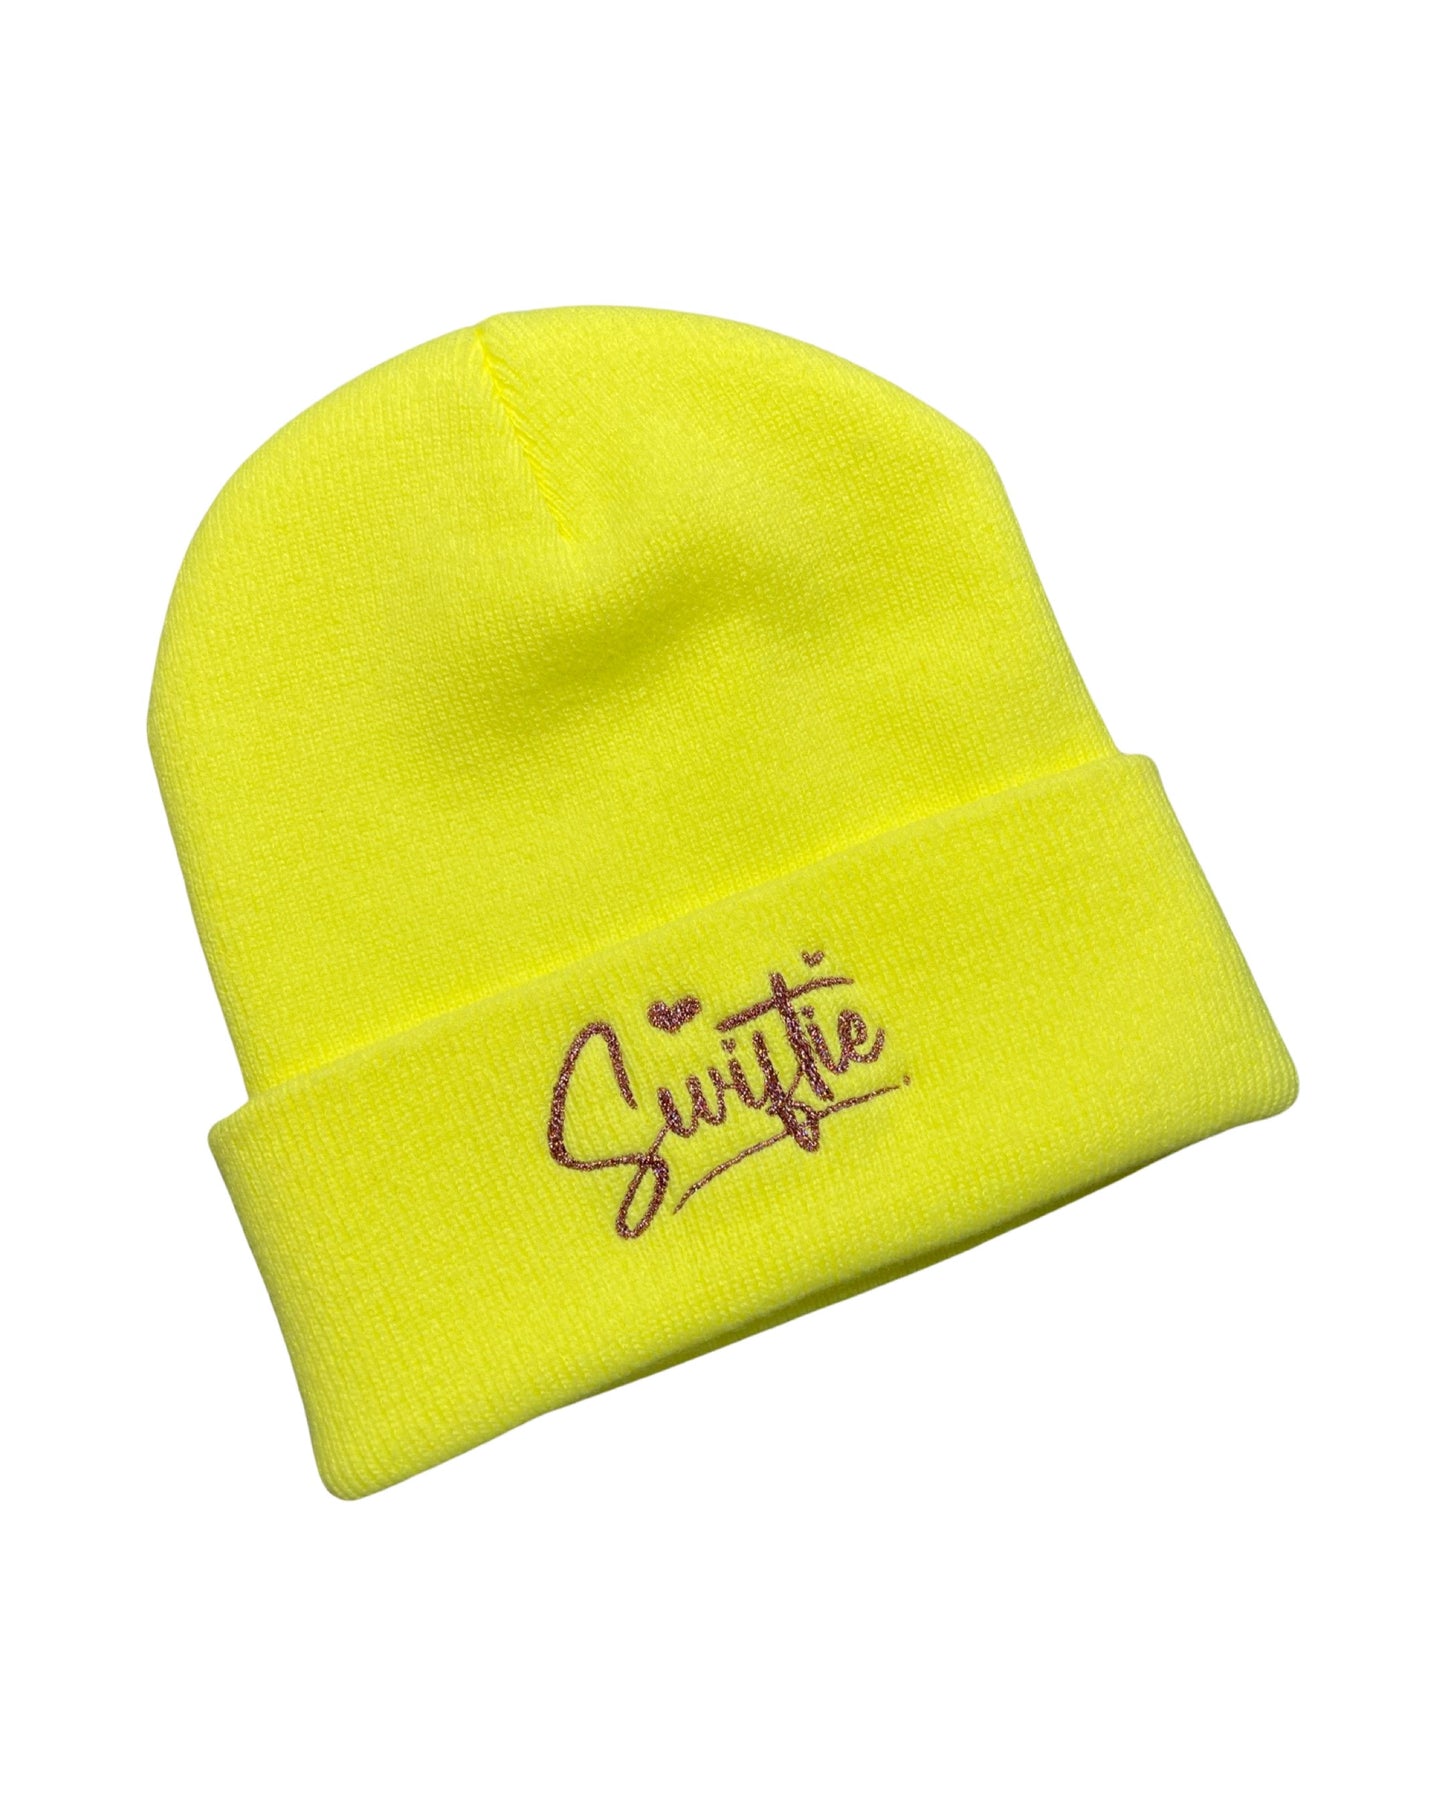 neon yellow knit beanie embroidered in pink holographic glitter to say Swiftie in cursive with hearts for the dots on the I's